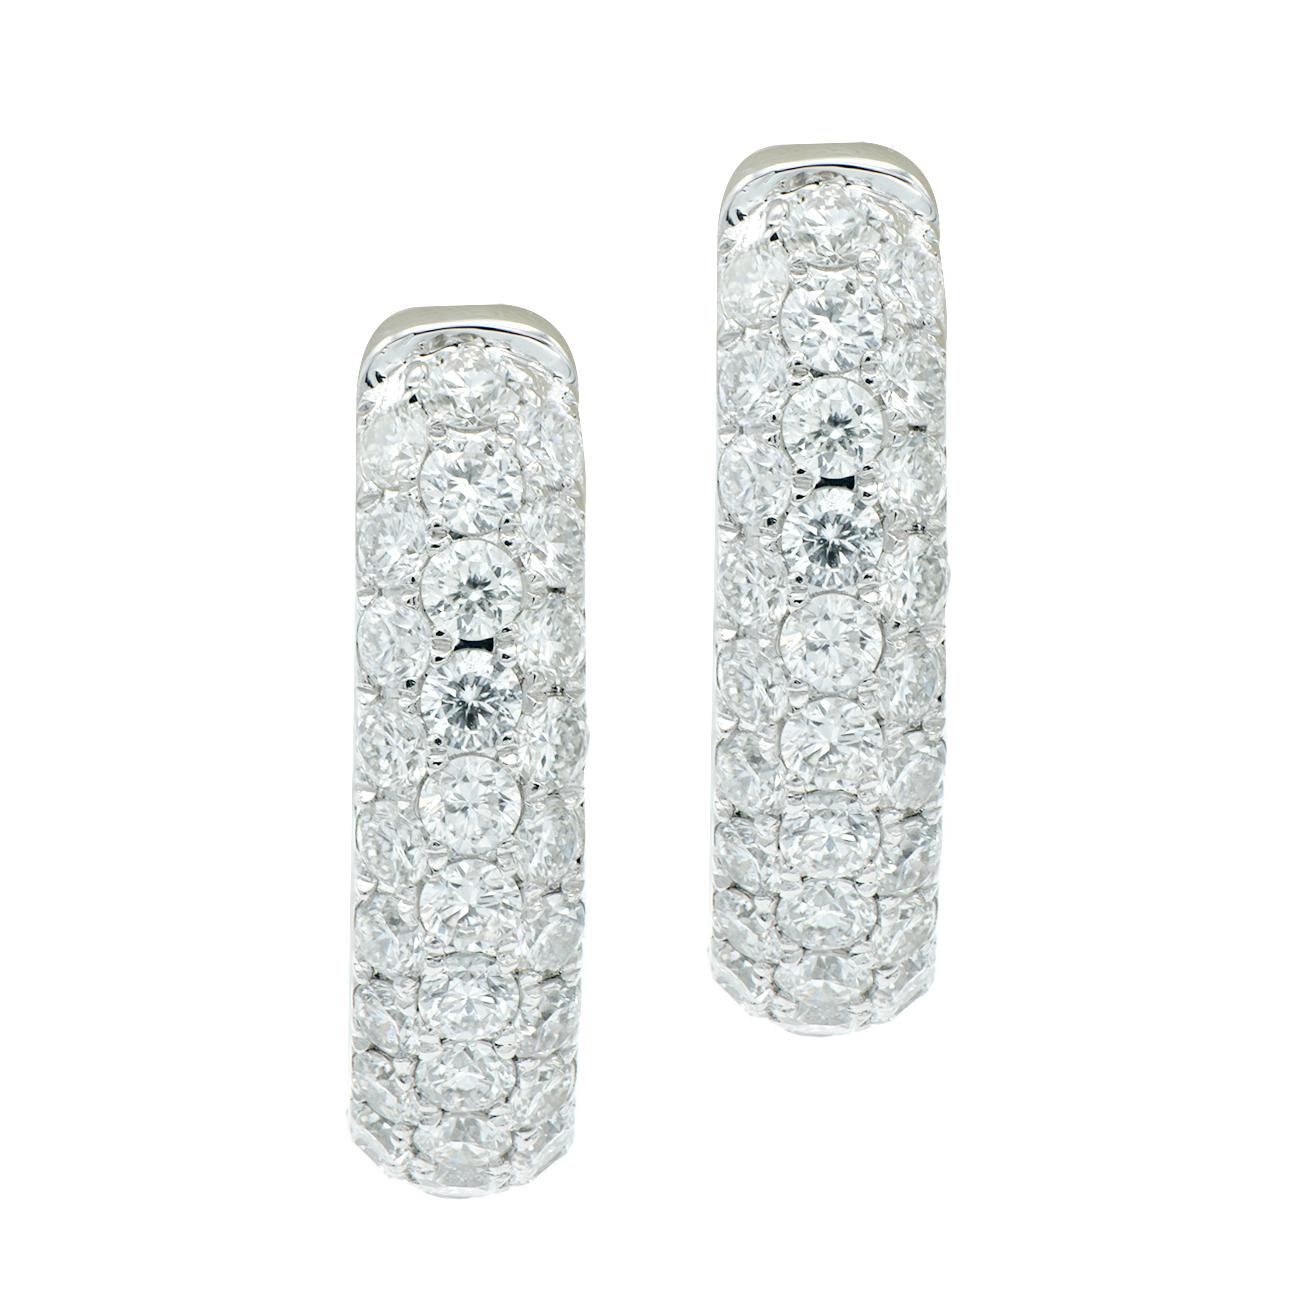 These beautiful huggie style earrings shimmer and sparkle with 3 rows of 122 VS2, G color diamonds that total 3.05 carats that are on the outside of the earring and the inside of the back for shine at every angle. They are set in 7.0 grams of 18